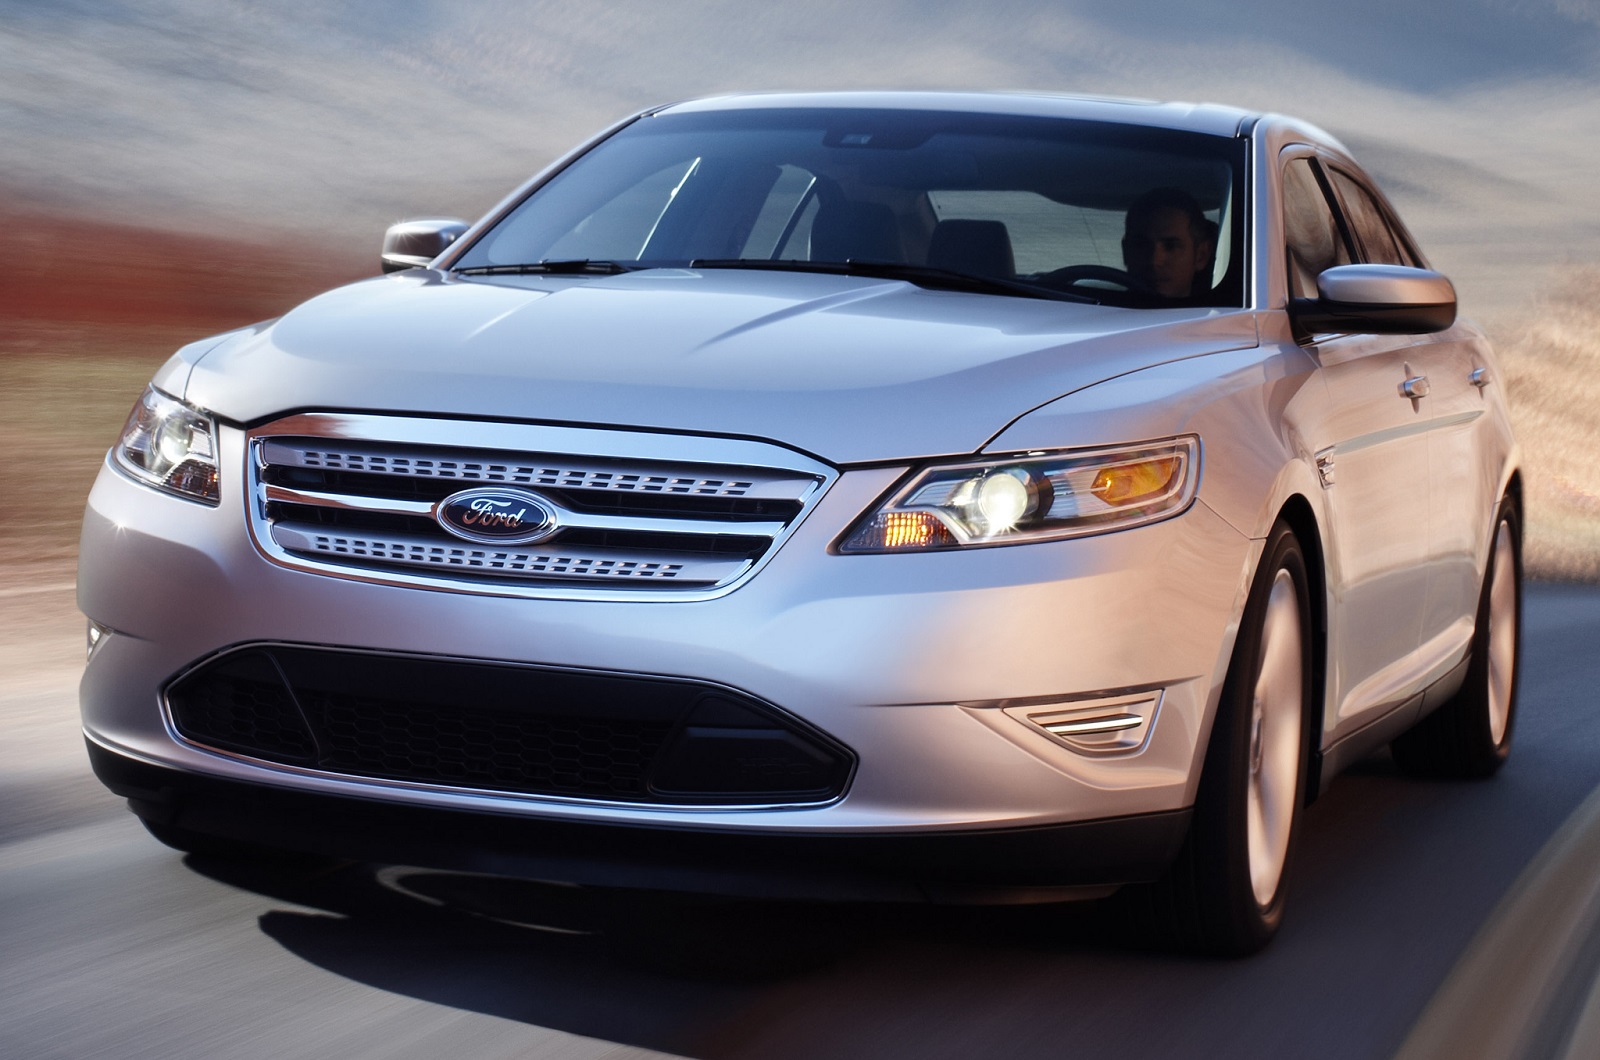 <p>Ford gave the Taurus nameplate one last shot at success when the sixth- and final-generation model arrived for the <strong>2010 model year</strong>. Like its predecessor, which started life as the Five Hundred, it was much bigger than the 1980s model and it consequently competed in a different segment. Ford envisioned it as a replacement for the Crown Victoria, especially in the all-important fleet market.</p><p>While the <strong>Police Interceptor Sedan</strong> attempted to fill in for the Crown Victoria, the born-again SHO model (pictured) tried luring enthusiasts back into the fold with a <strong>360bhp</strong> V6 and standard all-wheel-drive. It was too little, too late; the Taurus landed in a collapsing segment. Even law enforcement officers shunned it in favour of the rear-wheel-drive <strong>Dodge Charger Pursuit</strong> and Ford’s own Explorer, which was called <strong>Police Interceptor Utility</strong> in marketing-speak.</p><p>Sales peaked at <strong>69,603 units</strong> in 2013 and dropped to <strong>9,924</strong> in 2019 — a rounding error in the 1980s. Ford built the last Taurus for the American market in <strong>March 2019</strong>. Production continues in China, though the Chinese-spec Taurus shares only a name with the version sold in America in the 2010s.</p>